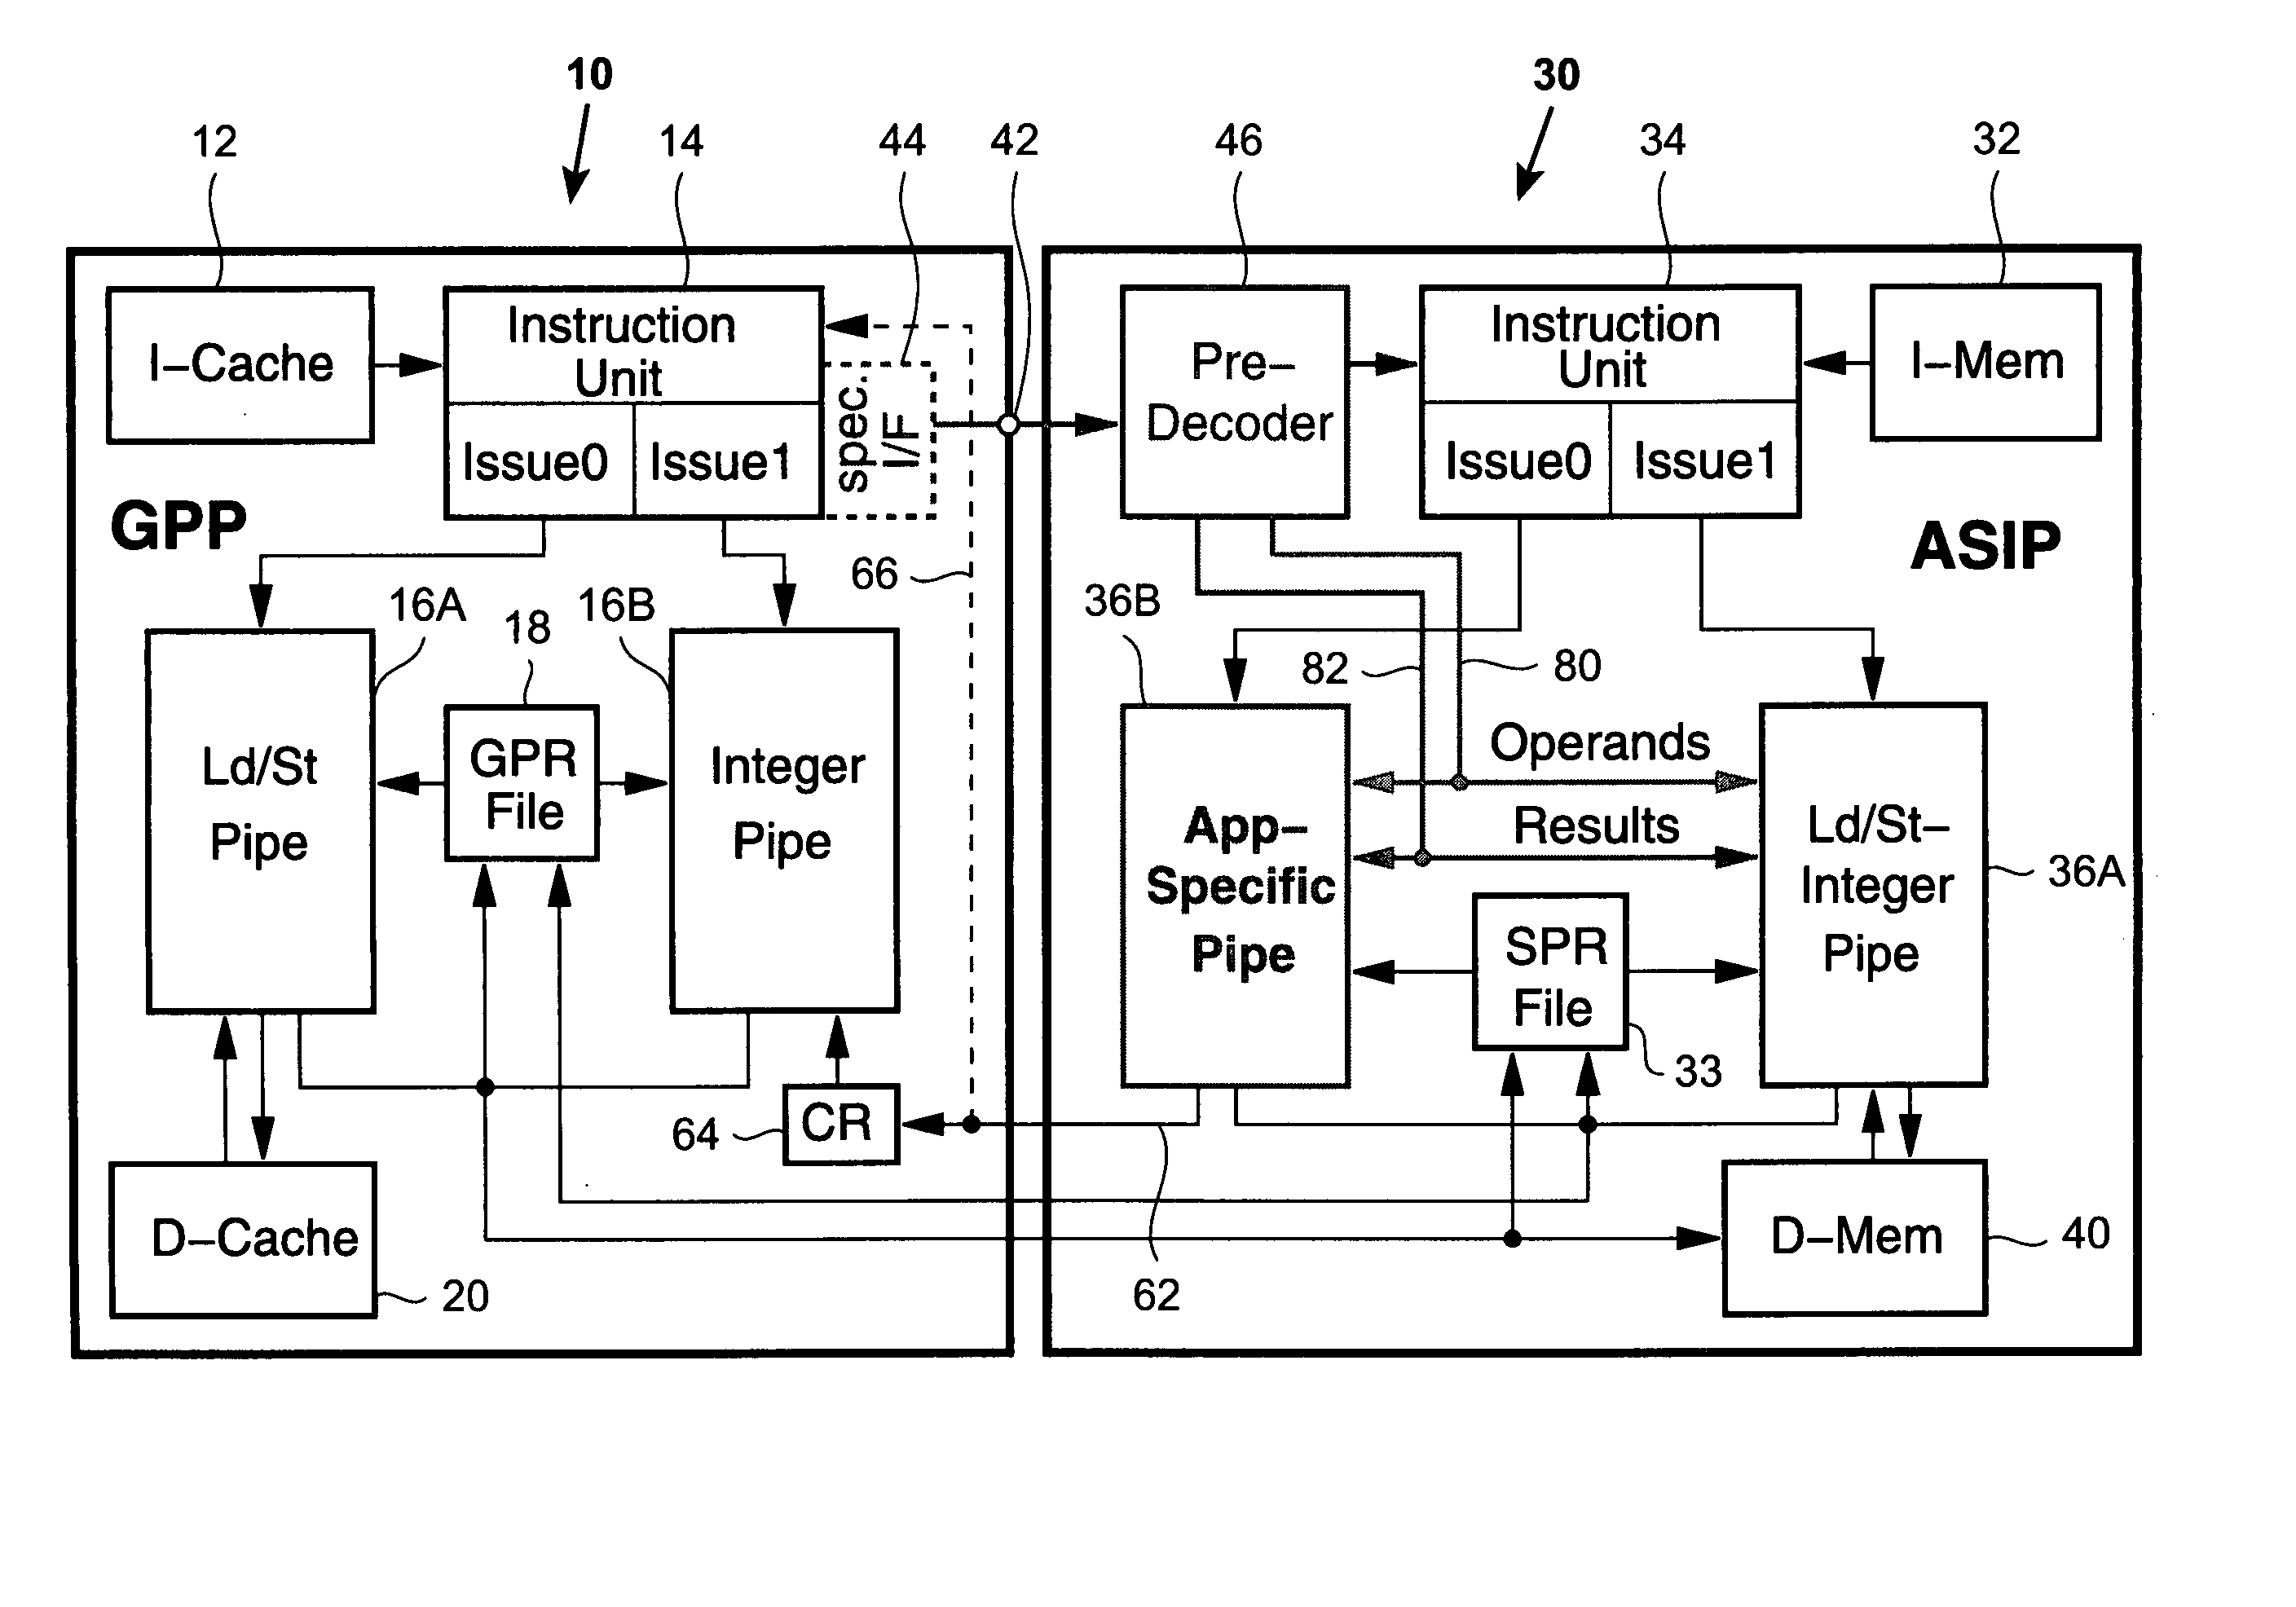 Coupling a general purpose processor to an application specific instruction set processor